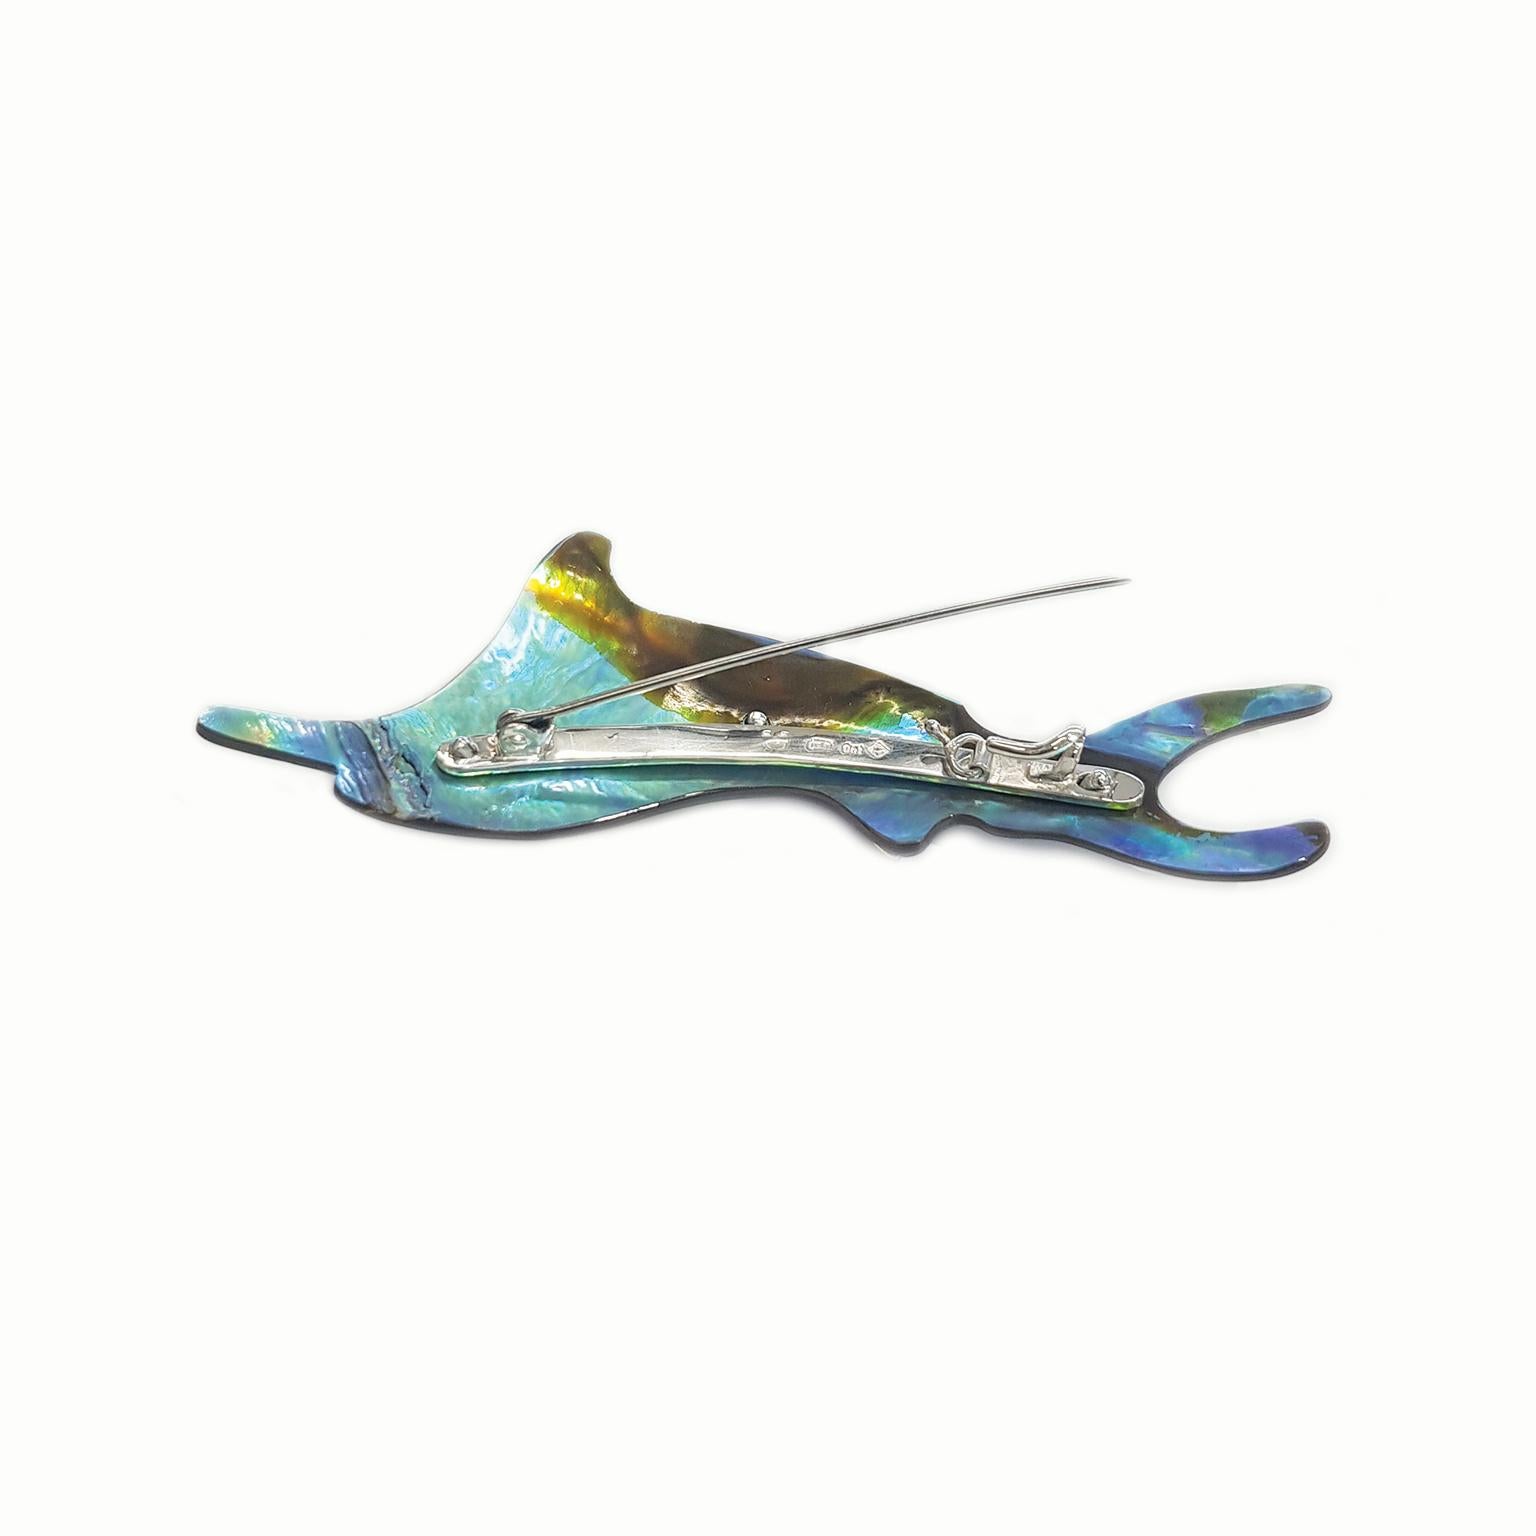 The Marlin Brooch is a totally unique and completely handcrafted and created by Paul Amey, including the fitting.  The Marlin Brooch was crafted from tarnish resistant Sterling Silver with 9K yellow gold fin and tail highlights and hand carved Paua